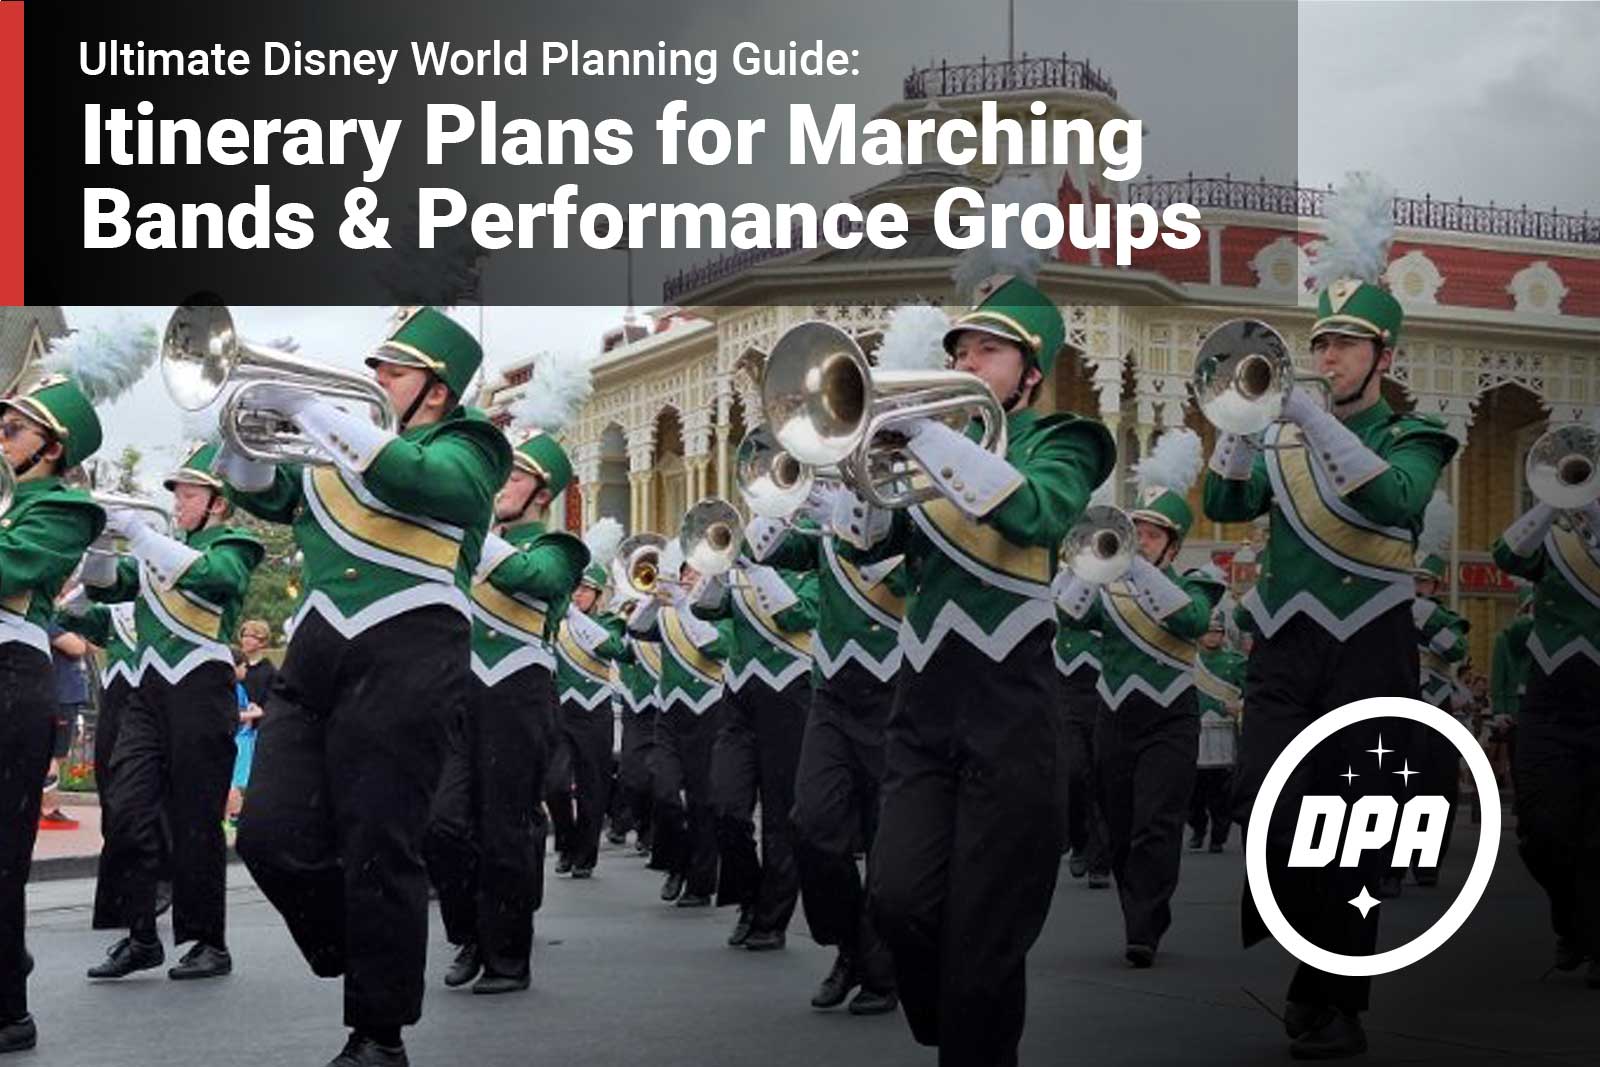 Itinerary Plans for Marching Bands & Performance Groups